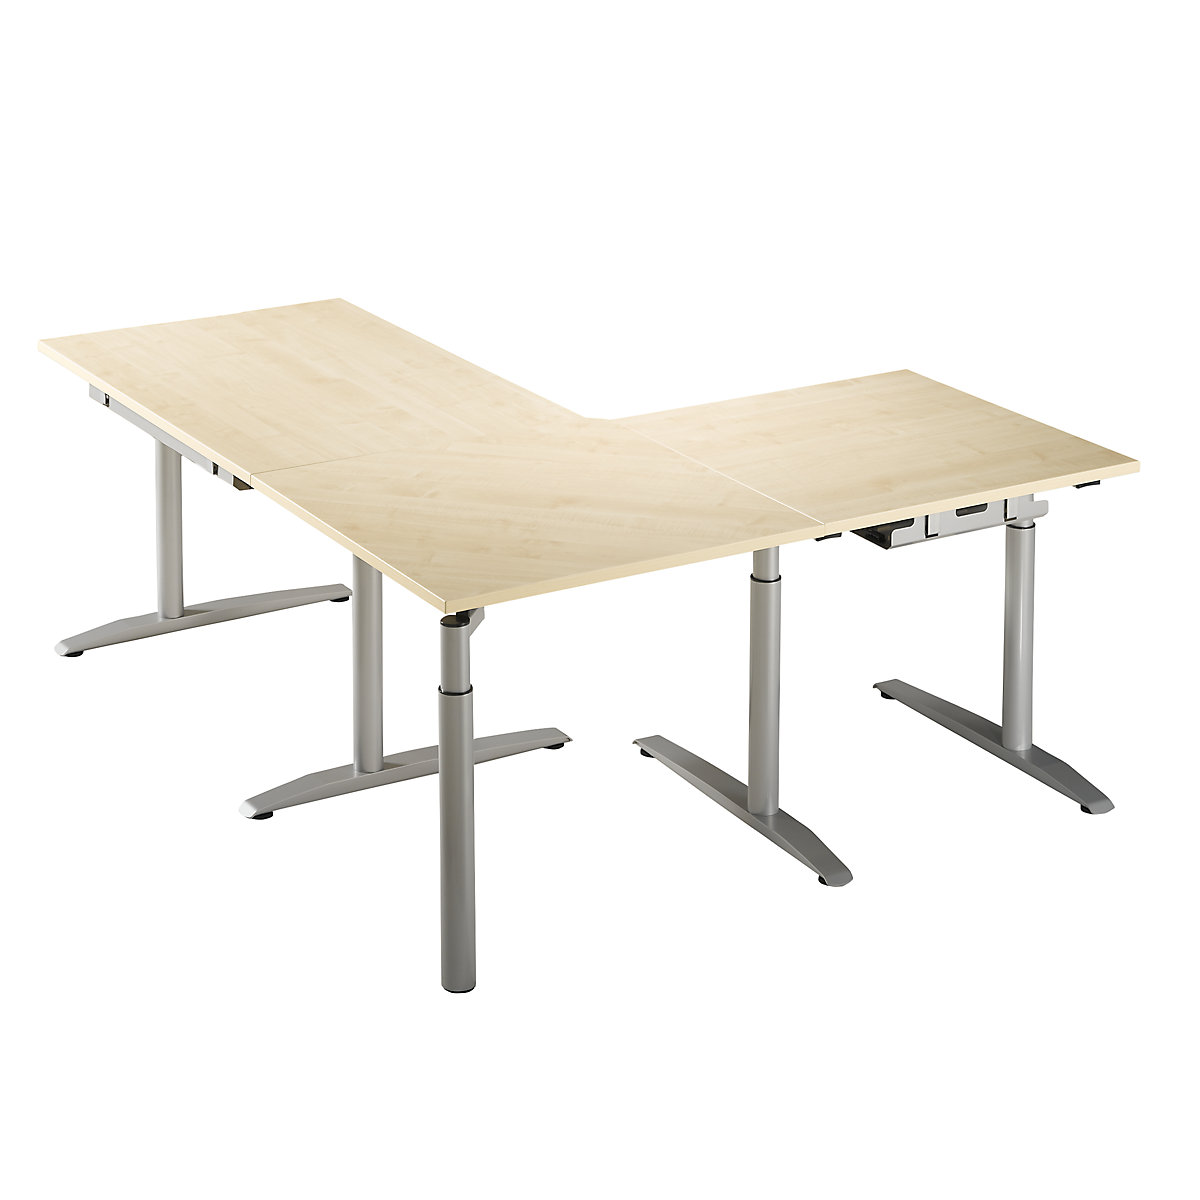 Linking top, height adjustable from 650 – 850 mm HANNA, 90°, with support leg, maple finish-6